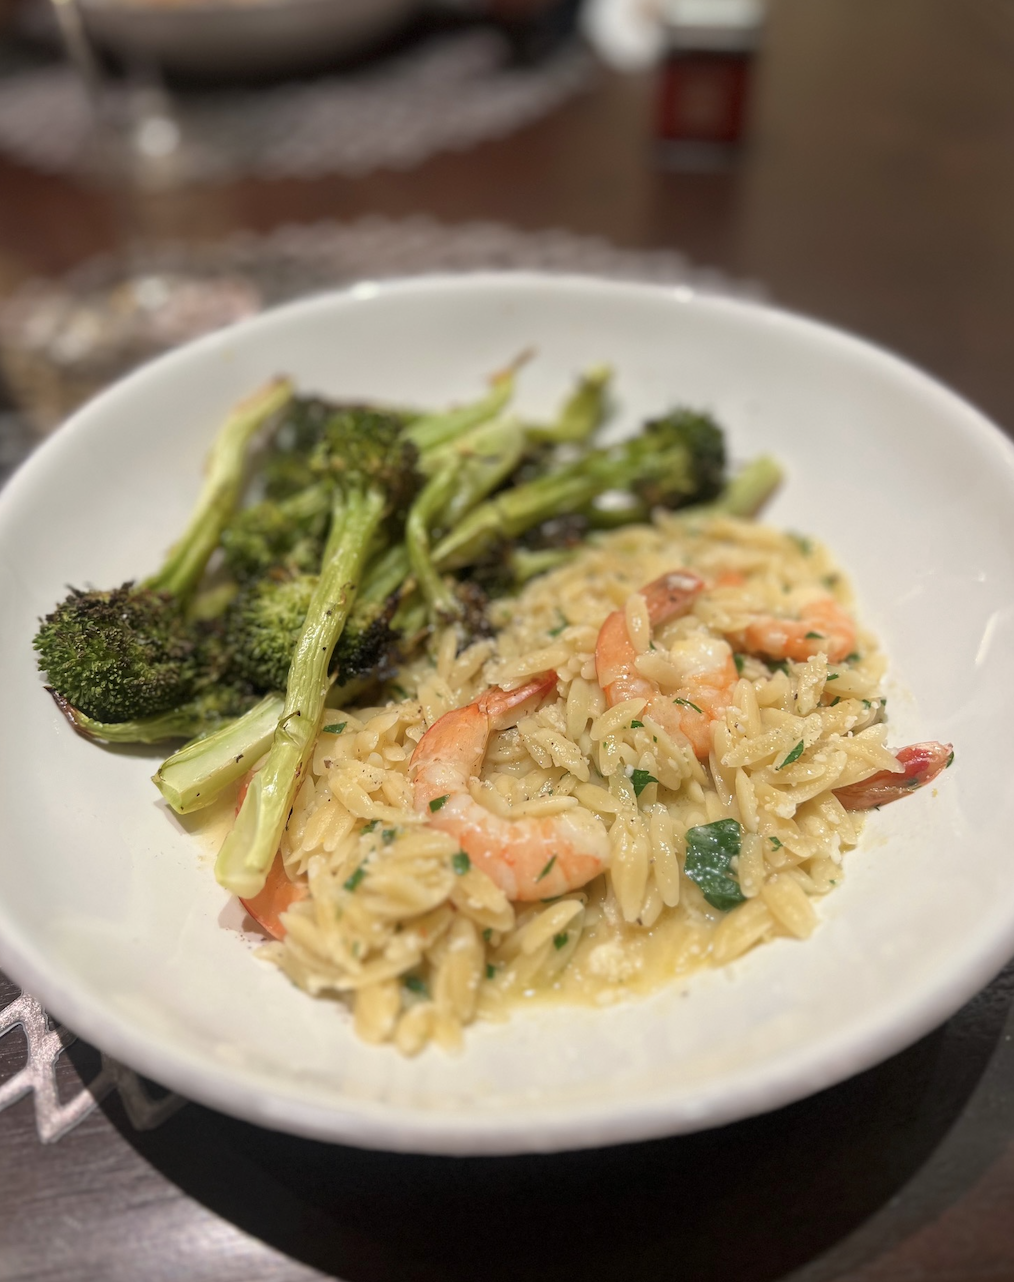 Plate of shrimp orzo with broccoli served on a table